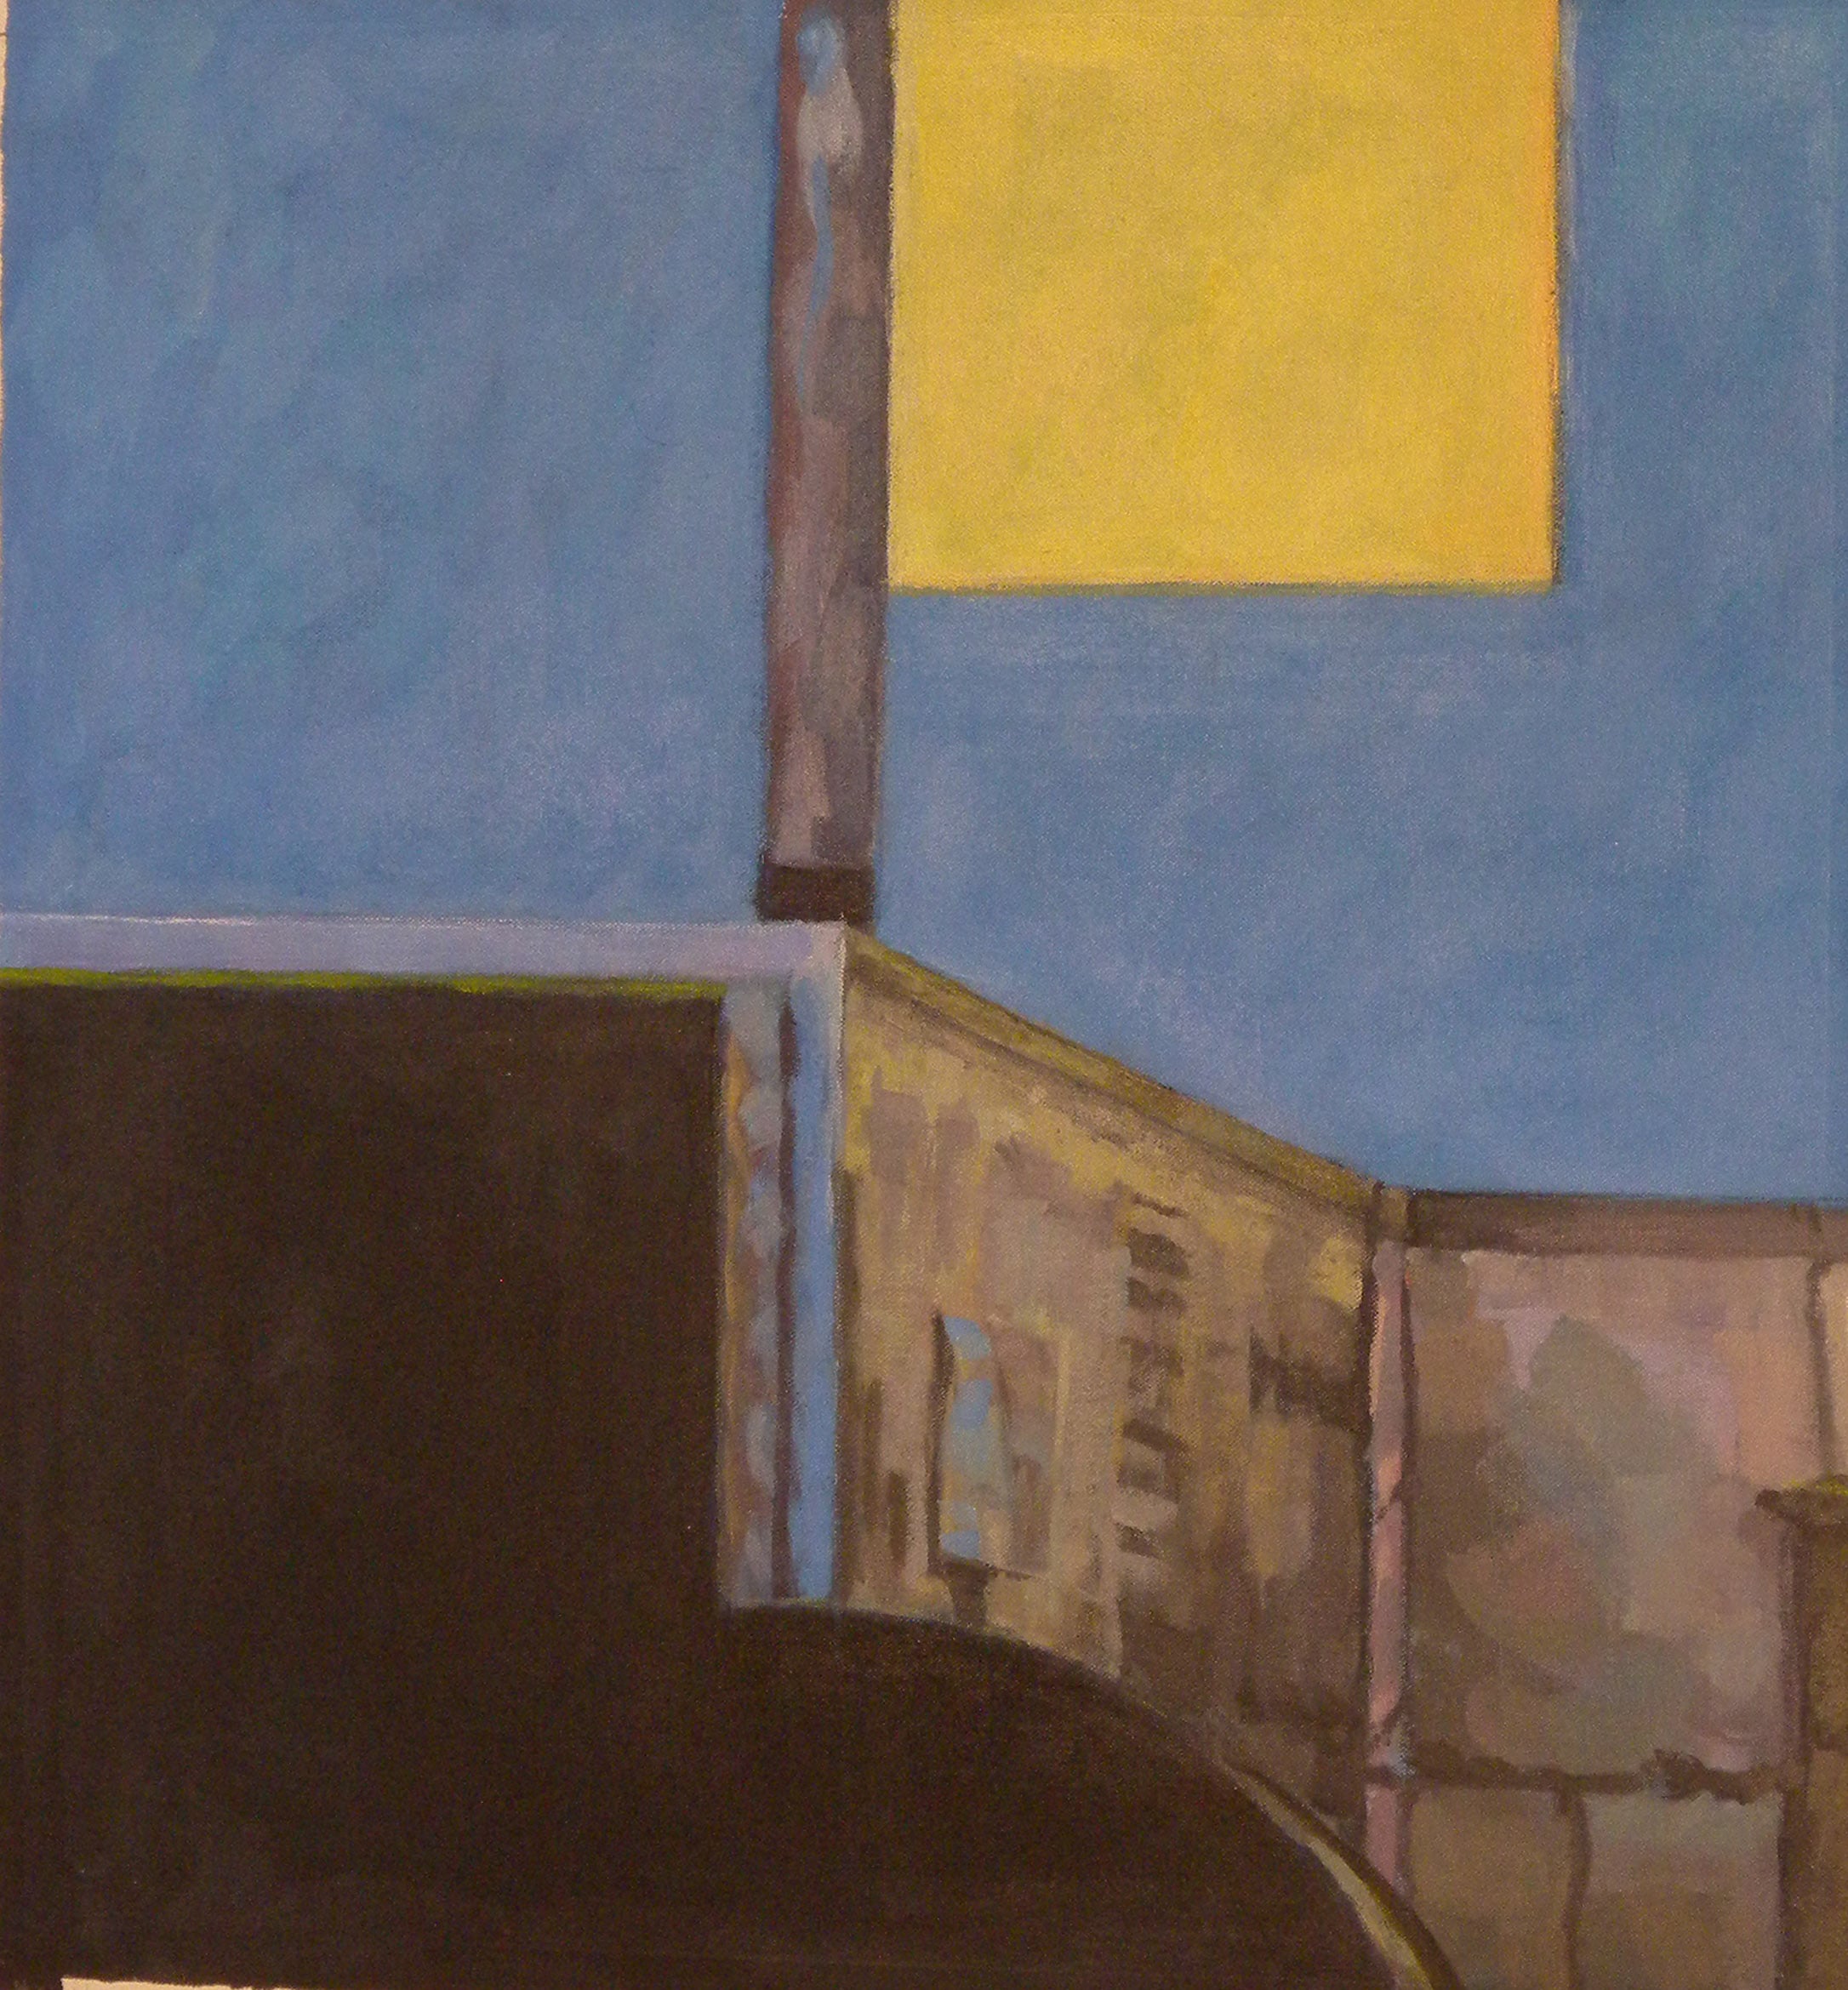  Bee Bee Roof Furniture (blue), gouache on museum board,&nbsp;16" x 15", 2008,&nbsp;Private Collection 